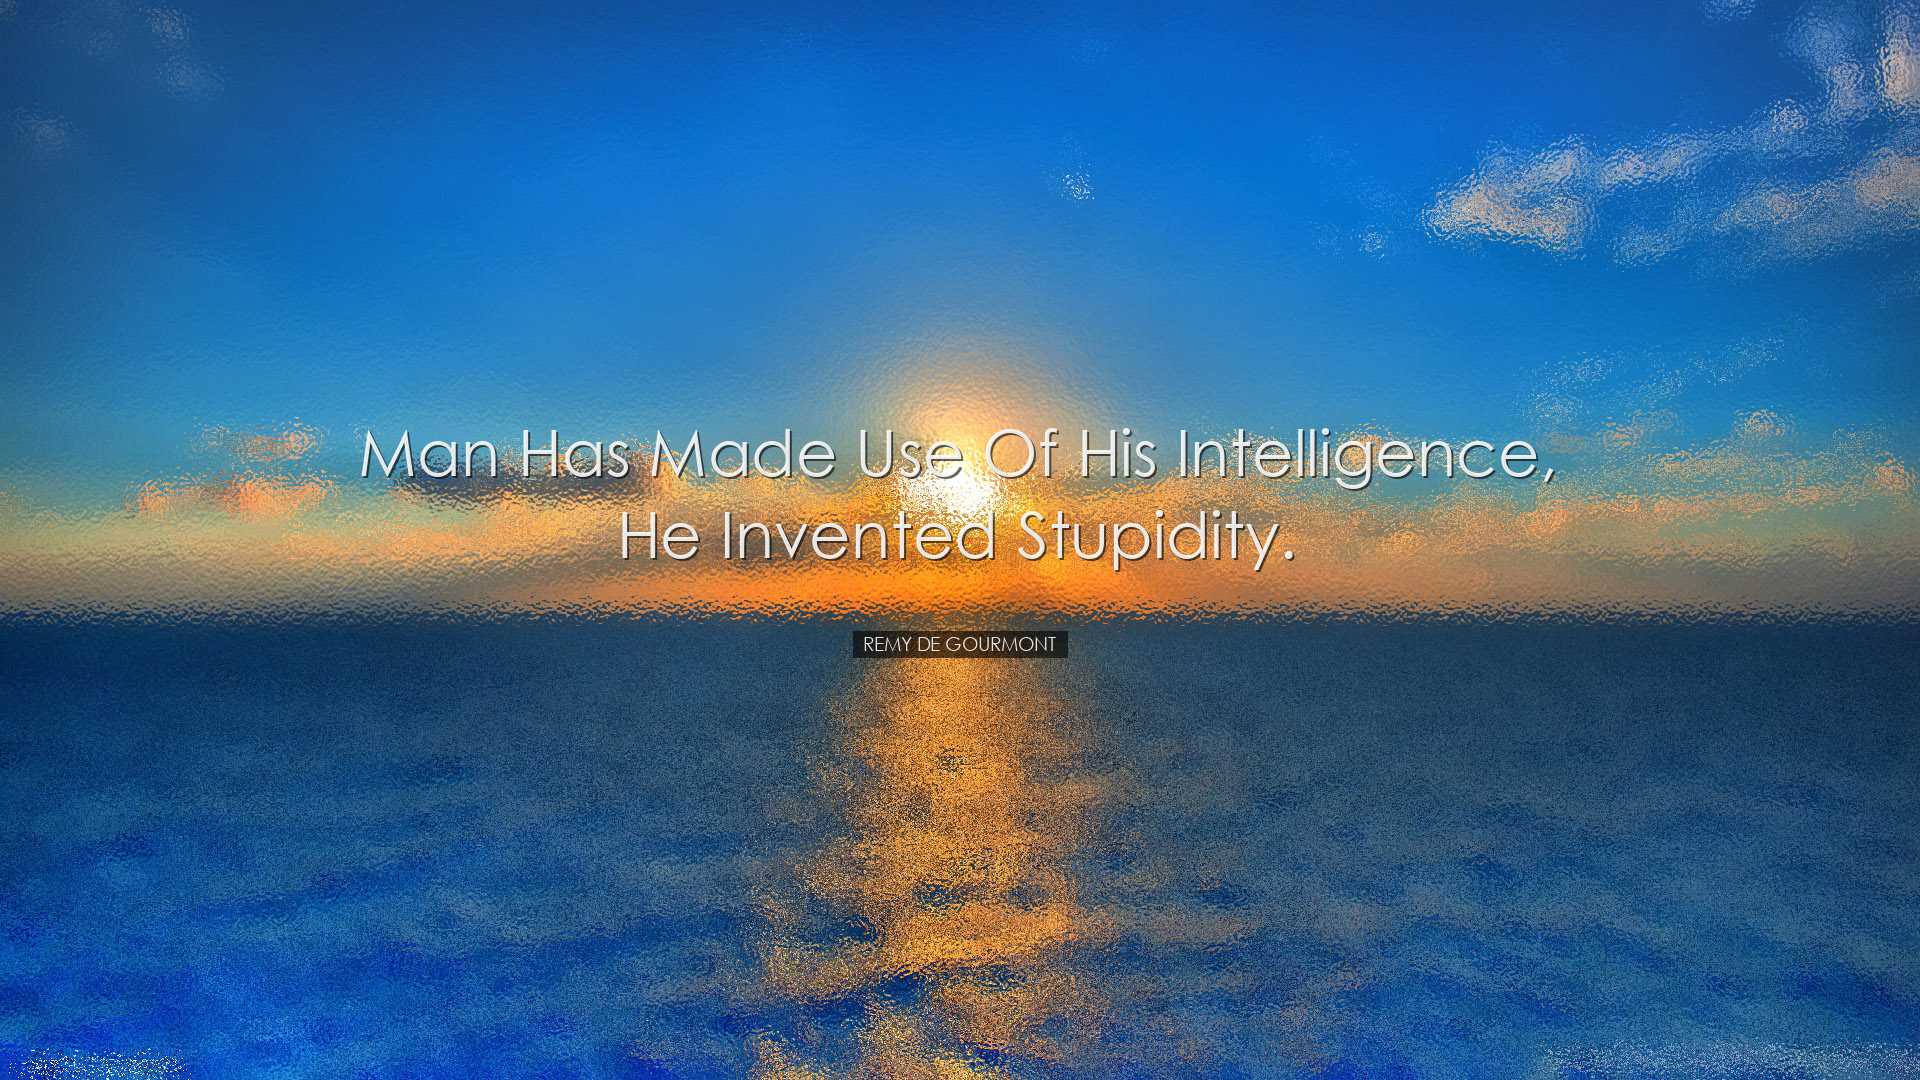 Man has made use of his intelligence, he invented stupidity. - Rem